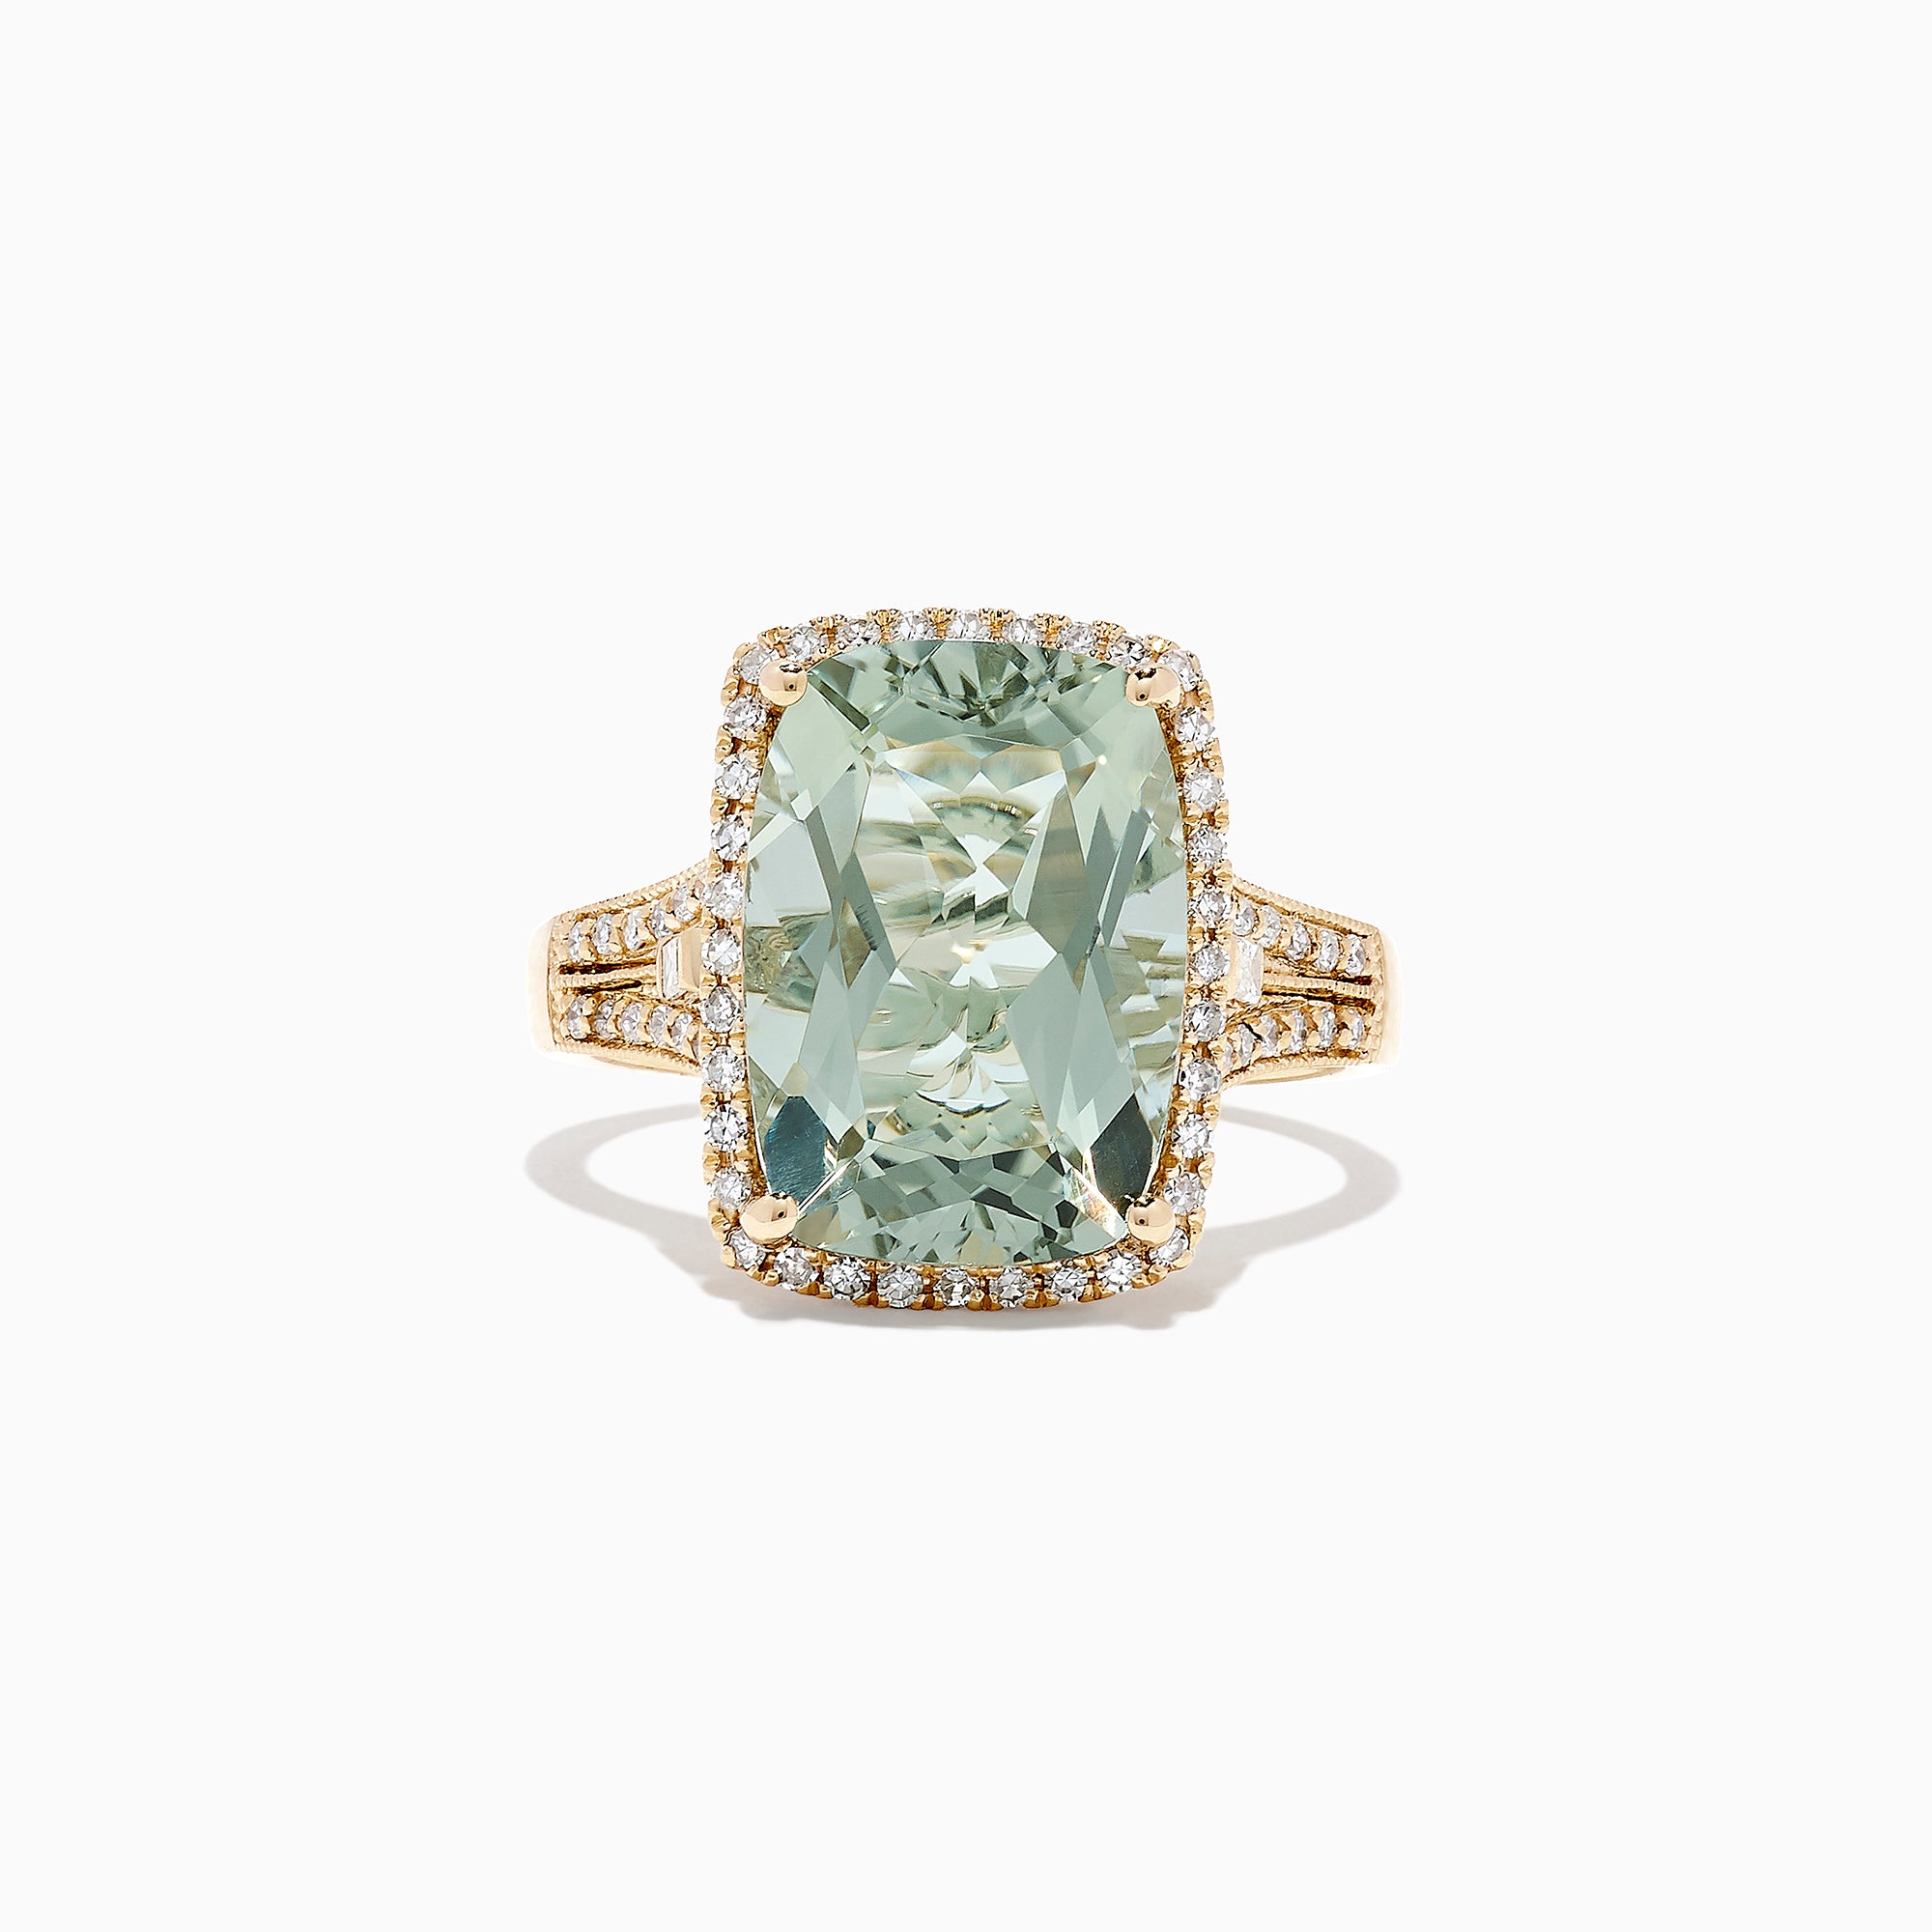 Effy 14K Yellow Gold Green Amethyst and Diamond Cocktail Ring